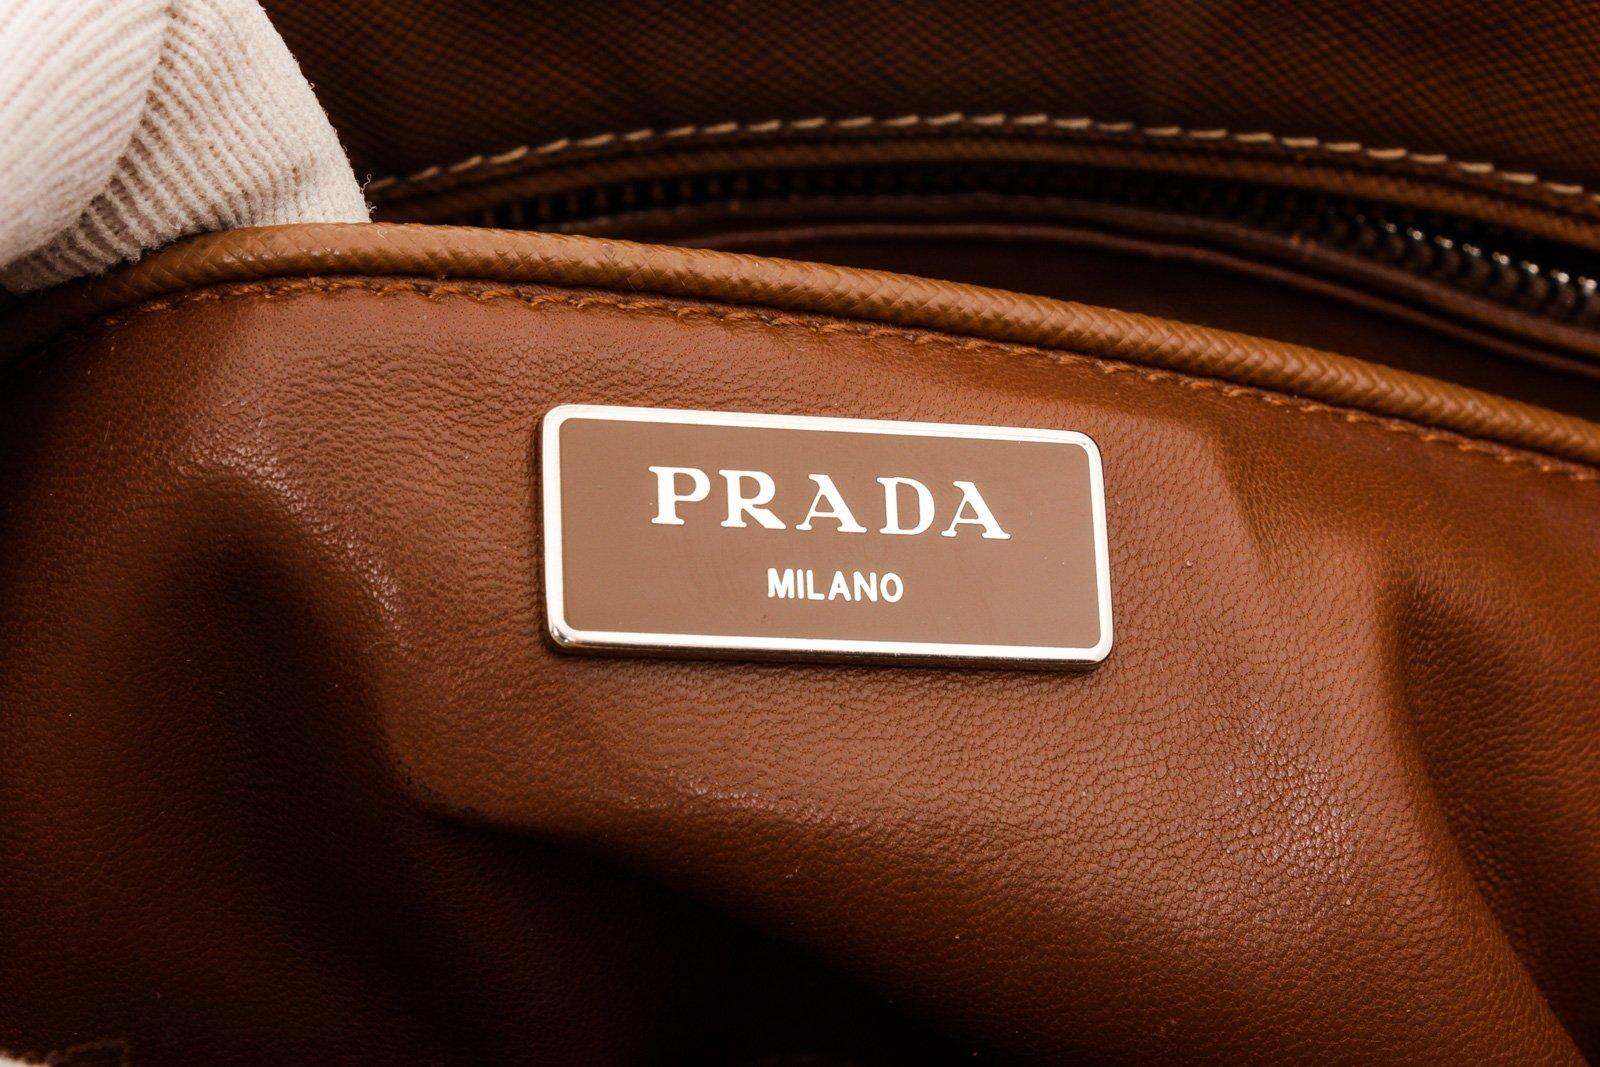 Prada Brown Saffiano Leather Double Zip Tote Bag with gold-tone hardware, three interior compartments pockets, dual top handles, leather shoulder strap, and closure.

26187MSC